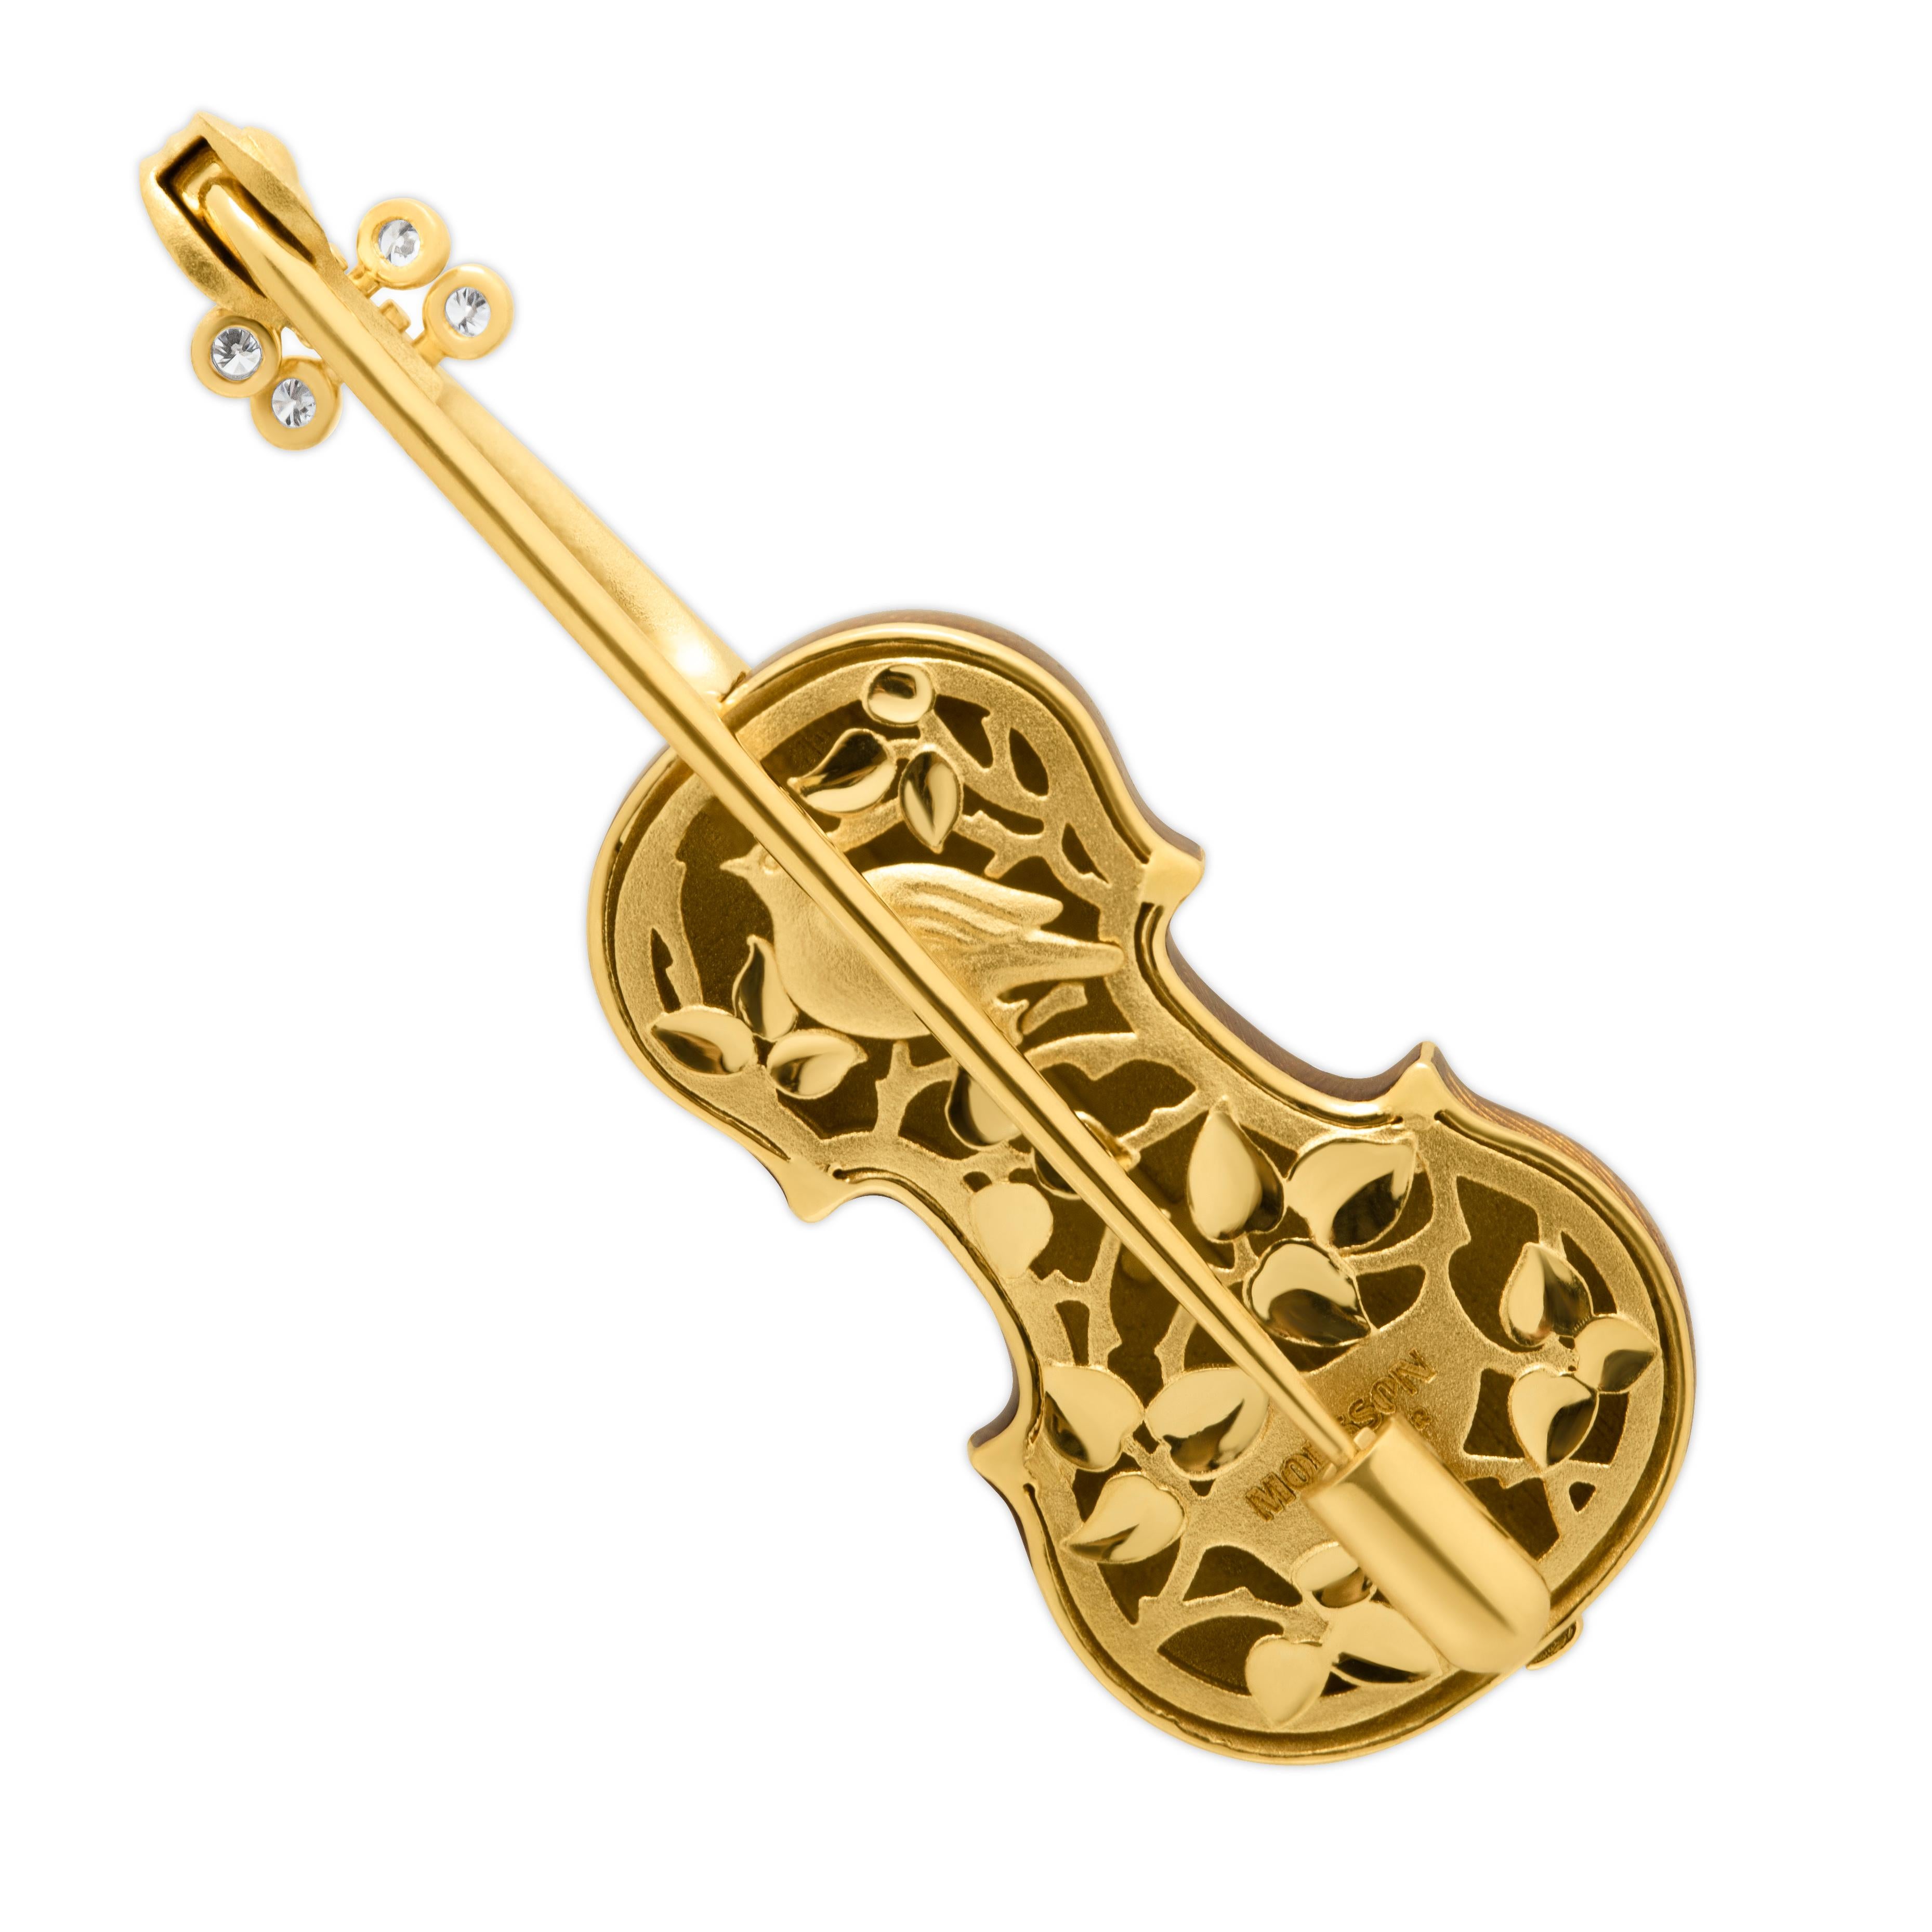 Classical Enamel Diamond 18 Karat Yellow Gold Mini Violin Brown Brooch

This 18K Gold Enamel Violin Brooch is a work of art! Our signature item from Artistic Collection, it boasts realistic texture of real wood and transparent enamel, along with